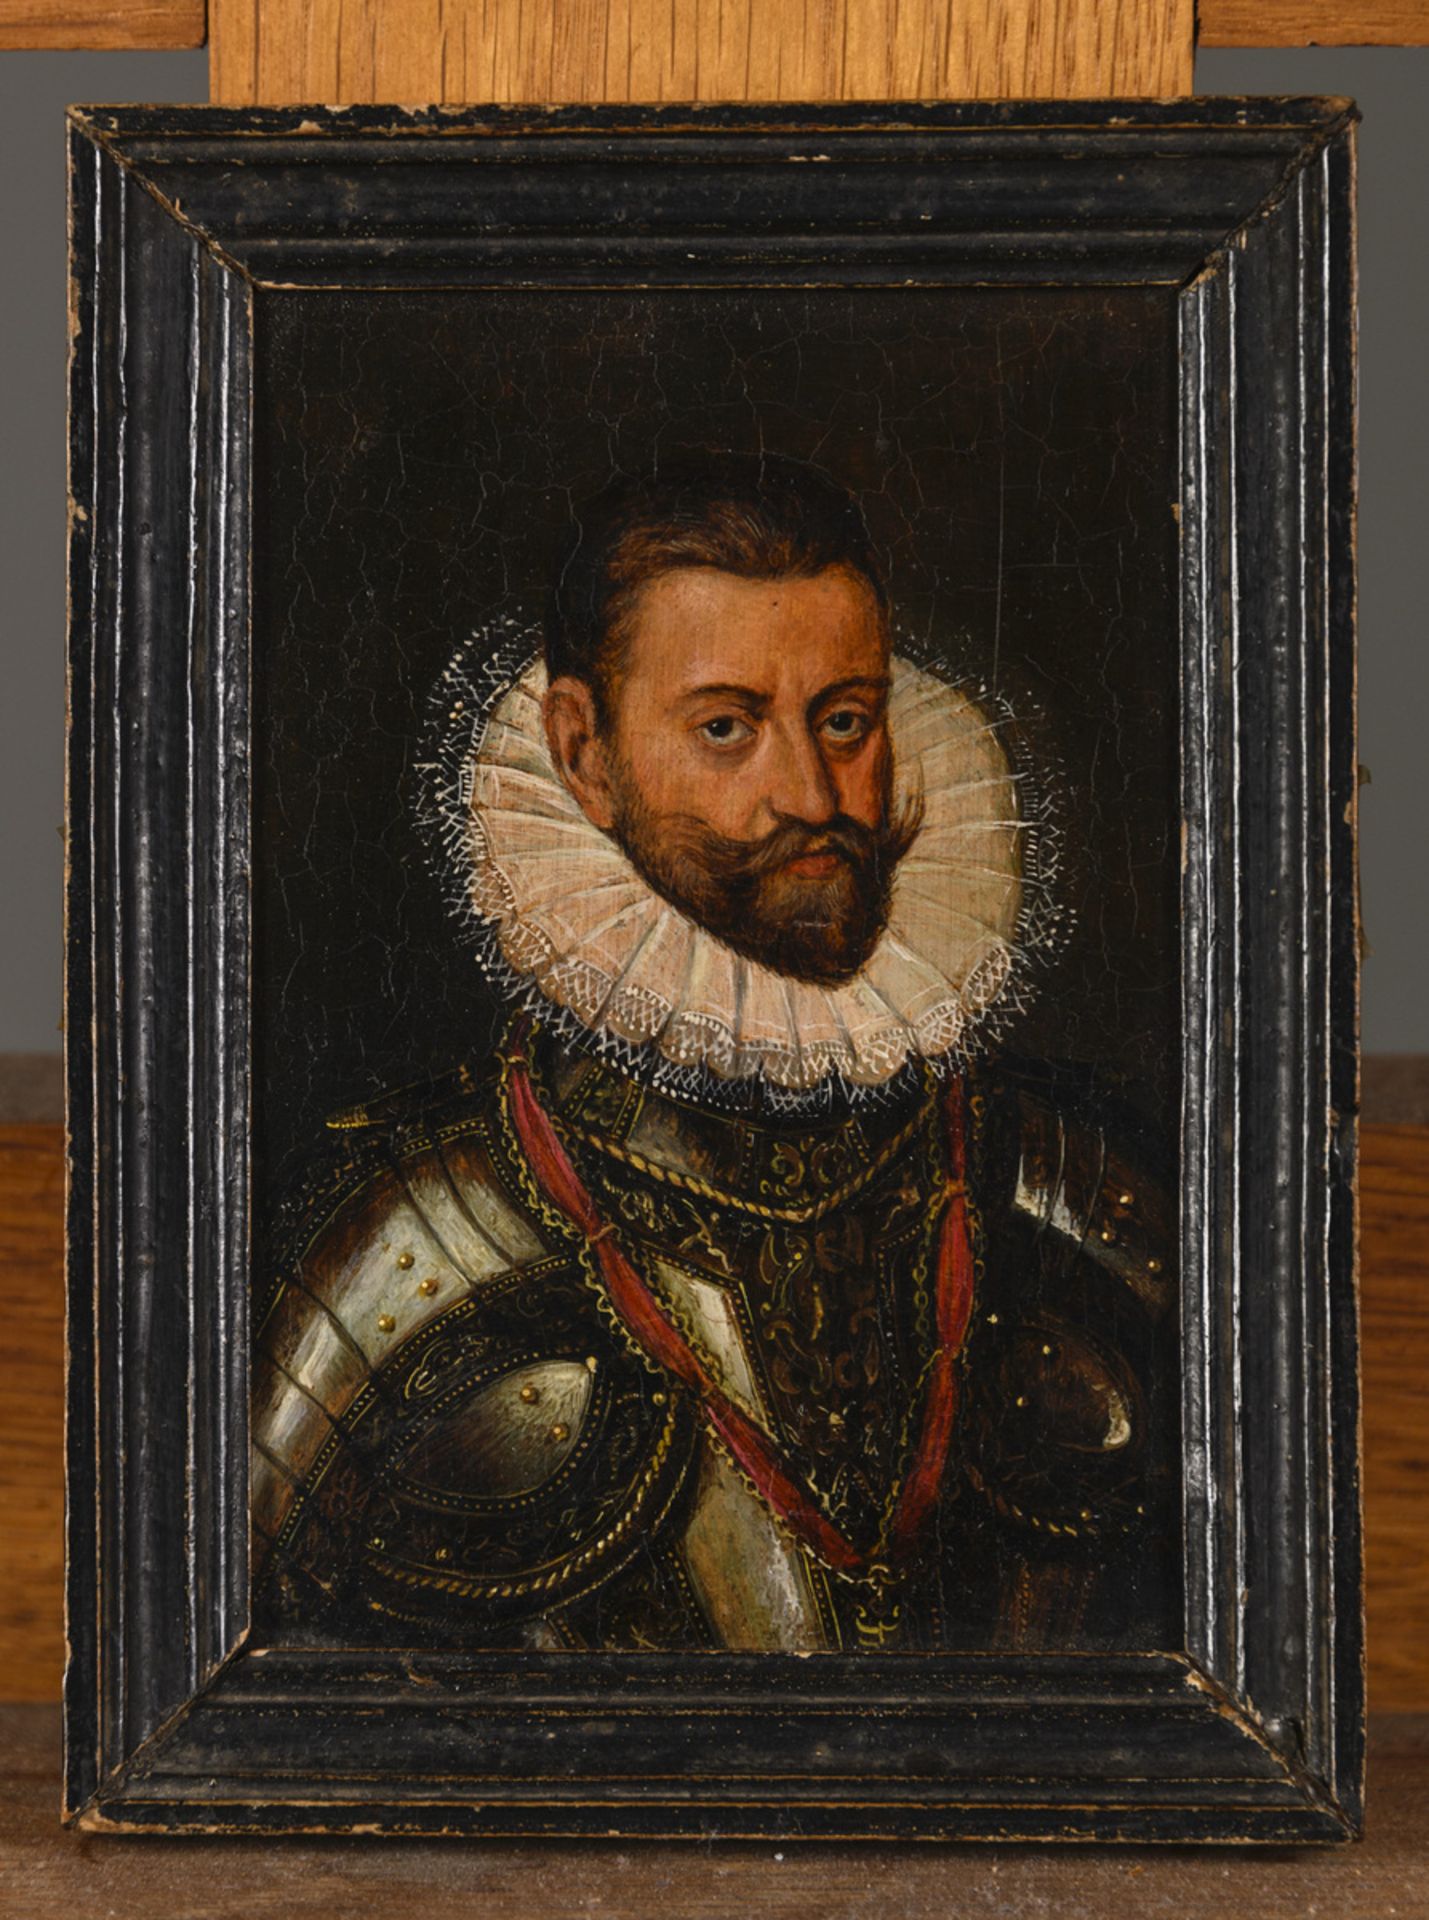 A miniature on panel 'portrait of a man in harness', 17th century (11x7.5cm) - Image 2 of 3